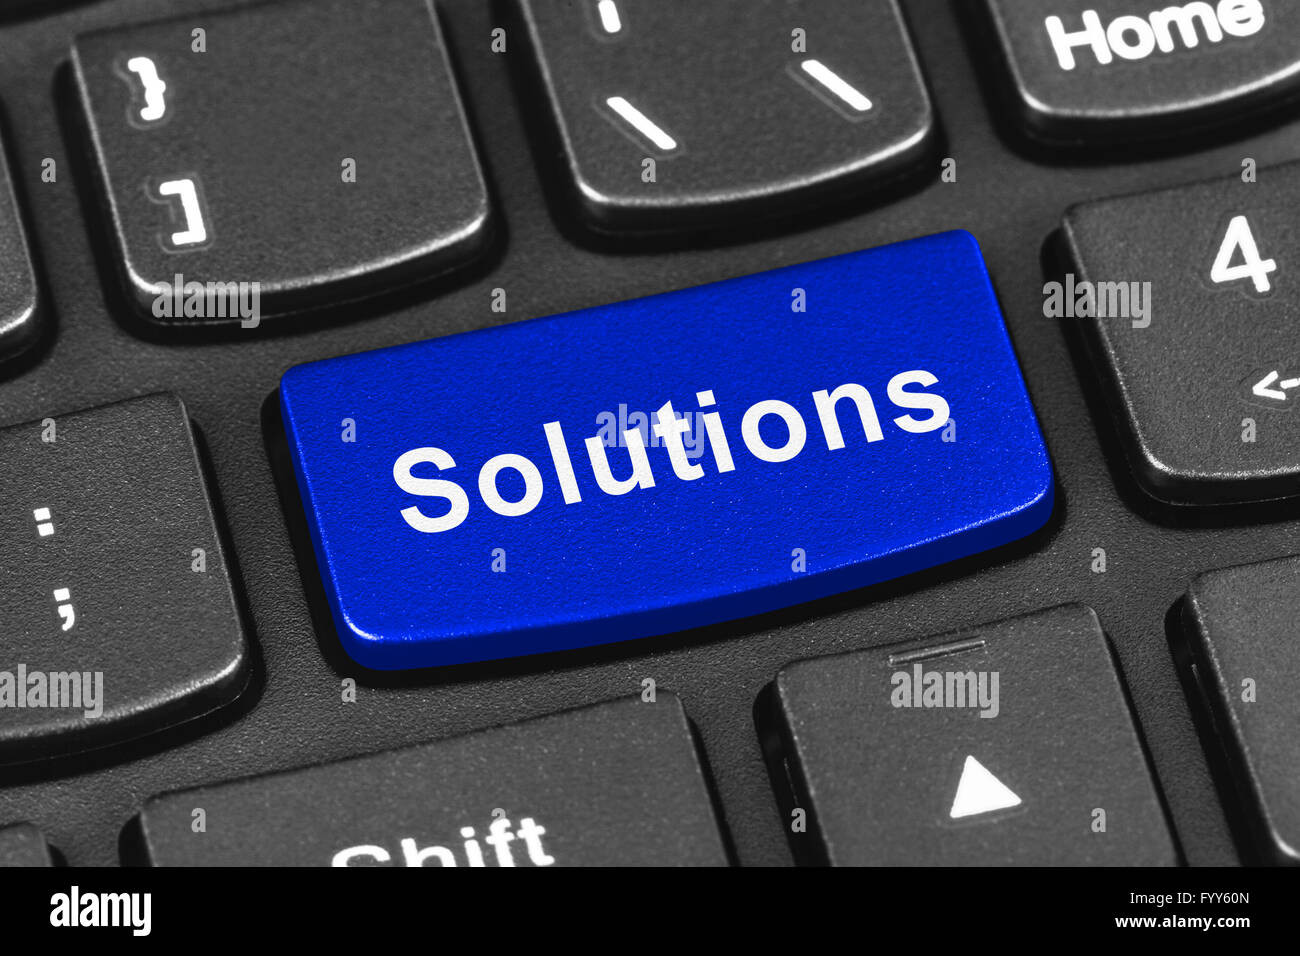 Computer notebook keyboard with Solutions key Stock Photo